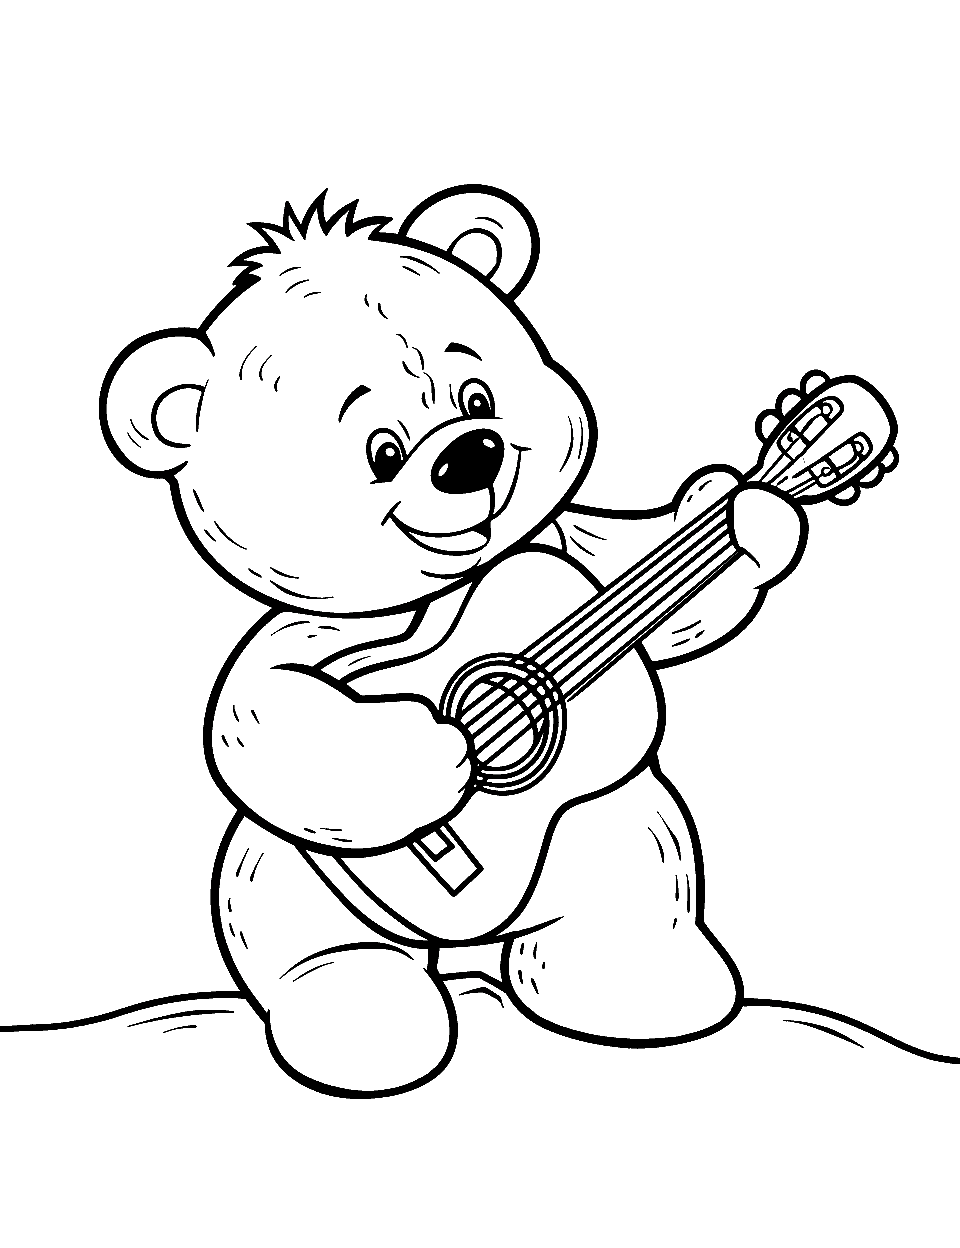 Musical Teddy Bear Coloring Page - A teddy bear playing a guitar.